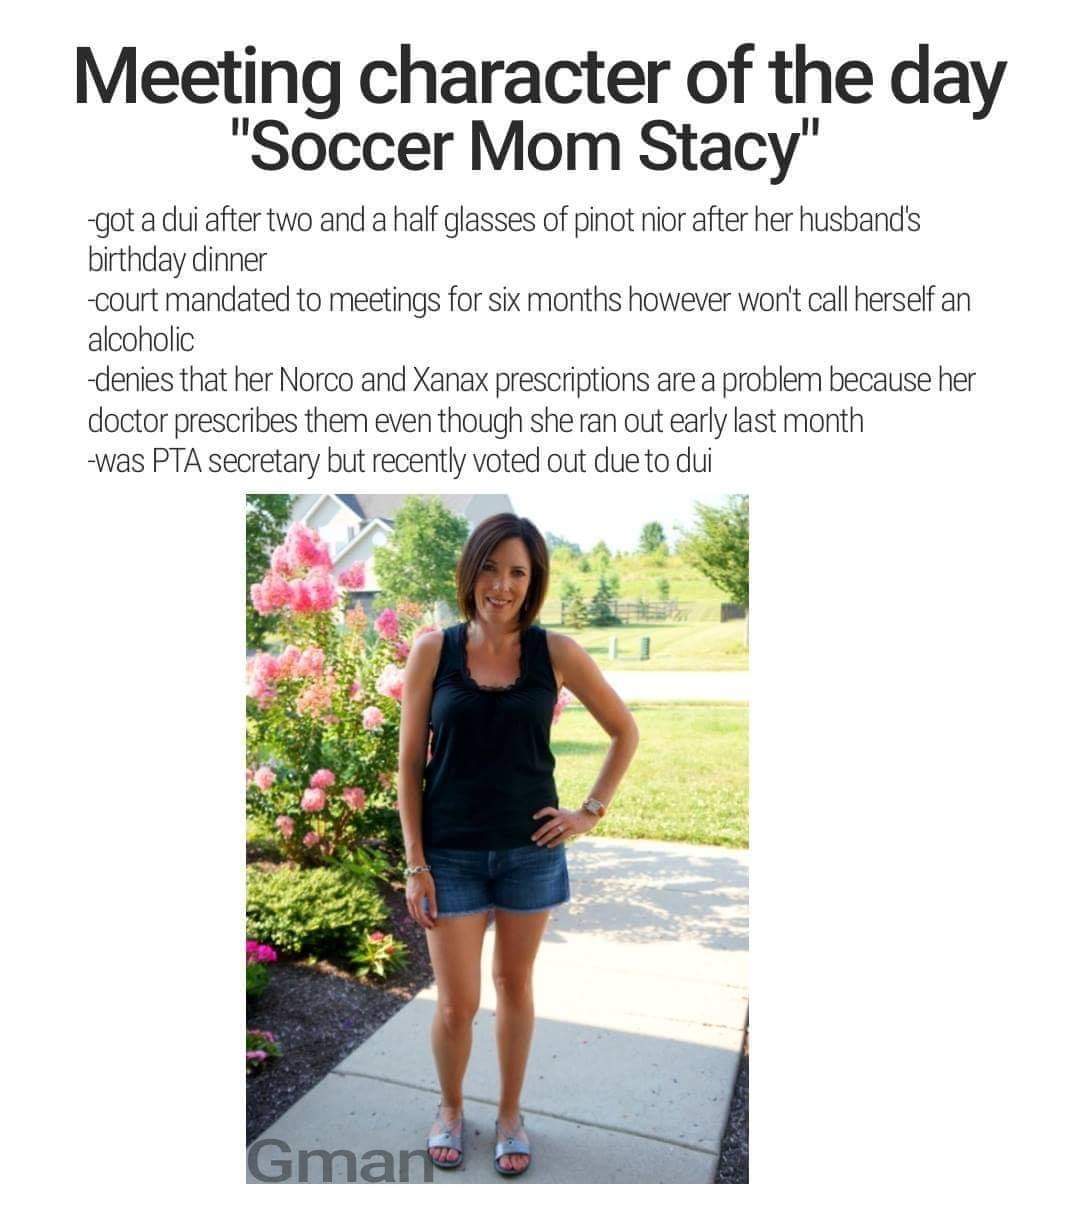 fucked up na recovery memes - Meeting character of the day "Soccer Mom Stacy" got a dui after two and a half glasses of pinot nior after her husband's birthday dinner court mandated to meetings for six months however won't call herself an alcoholic denies